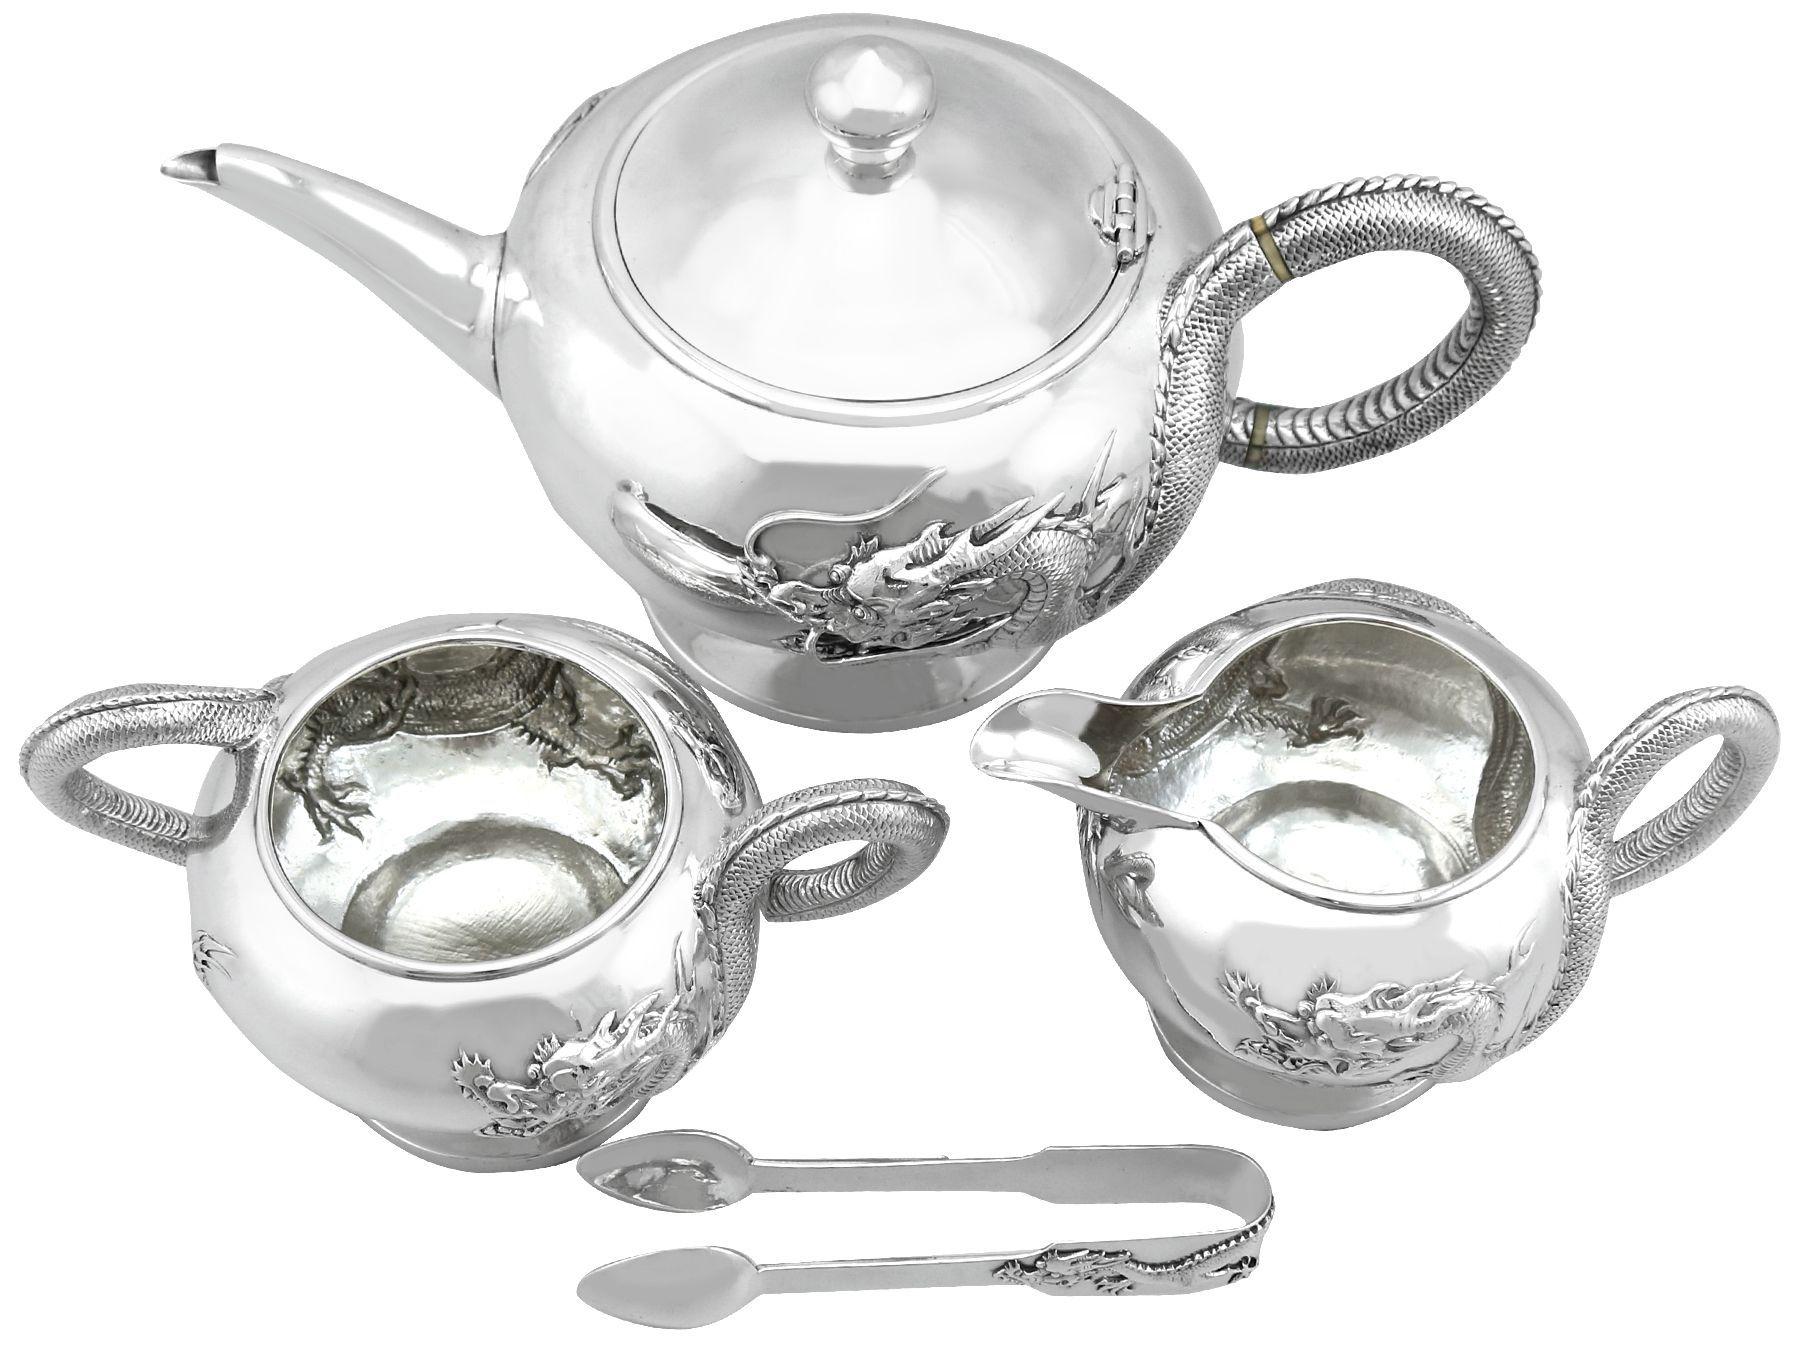 An exceptional, fine and impressive antique Chinese export silver three piece tea service; an addition to our diverse silver teaware collection

This exceptional antique Chinese silver tea service consists of a teapot, cream jug and sugar bowl,